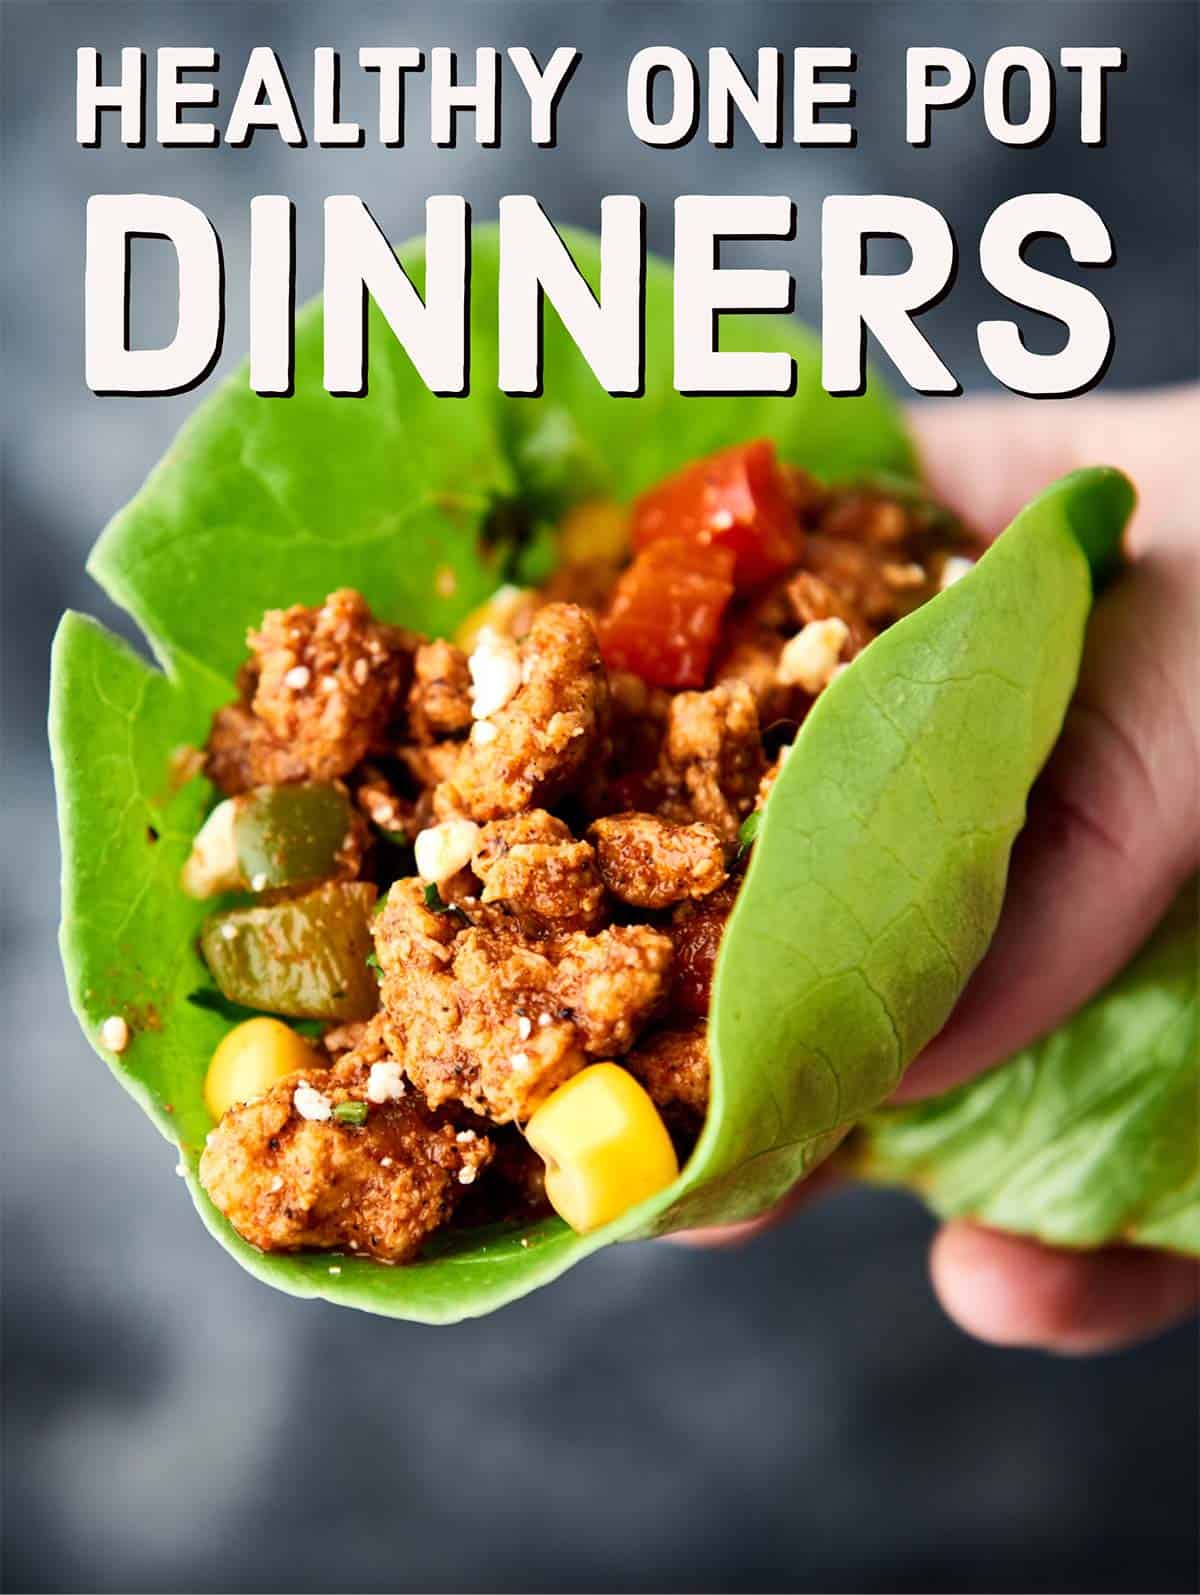 Healthy One Pot Dinner Recipes made on the stove, in the oven, in your crockpot, or in the instant pot! All easy. All one pot. All healthy. All totally delicious. showmetheyummy.com #healthy #onepot #dinner